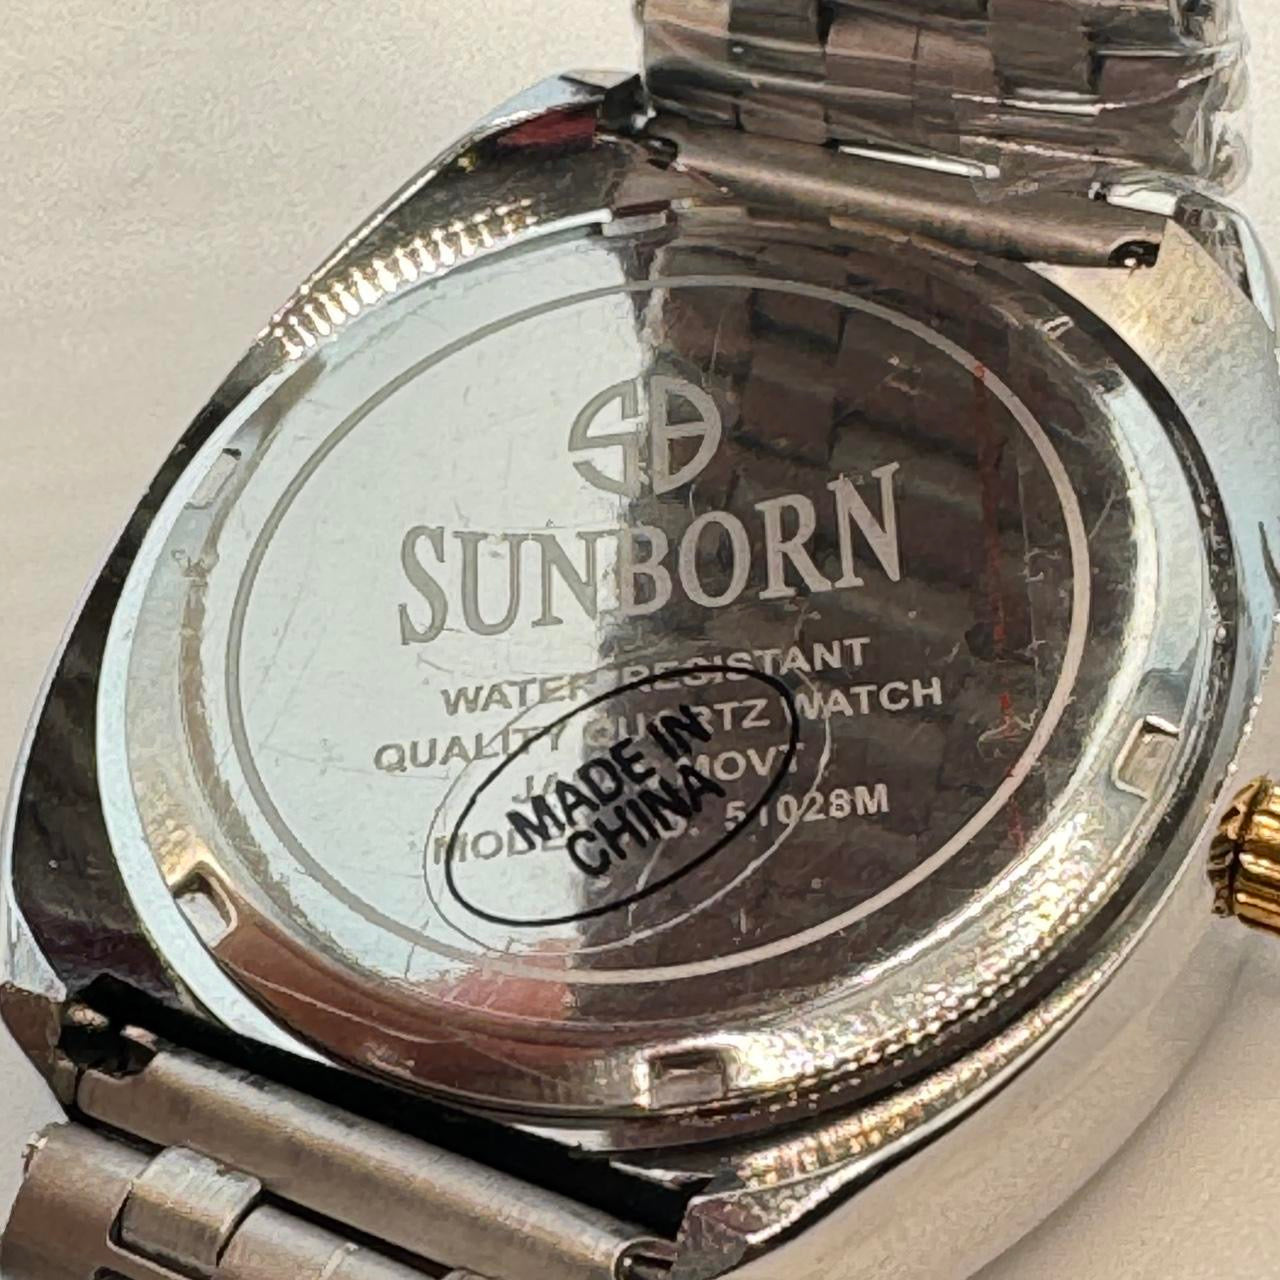 Sunborn Brand  Watch for Men , 40mm Diameter , Brand New Item ,  Stainless Steel ,  Water Resistant , With Tag  Still Attached . Color Mix Goldtone and Gray , with Date, Ships from NEW JERSEY